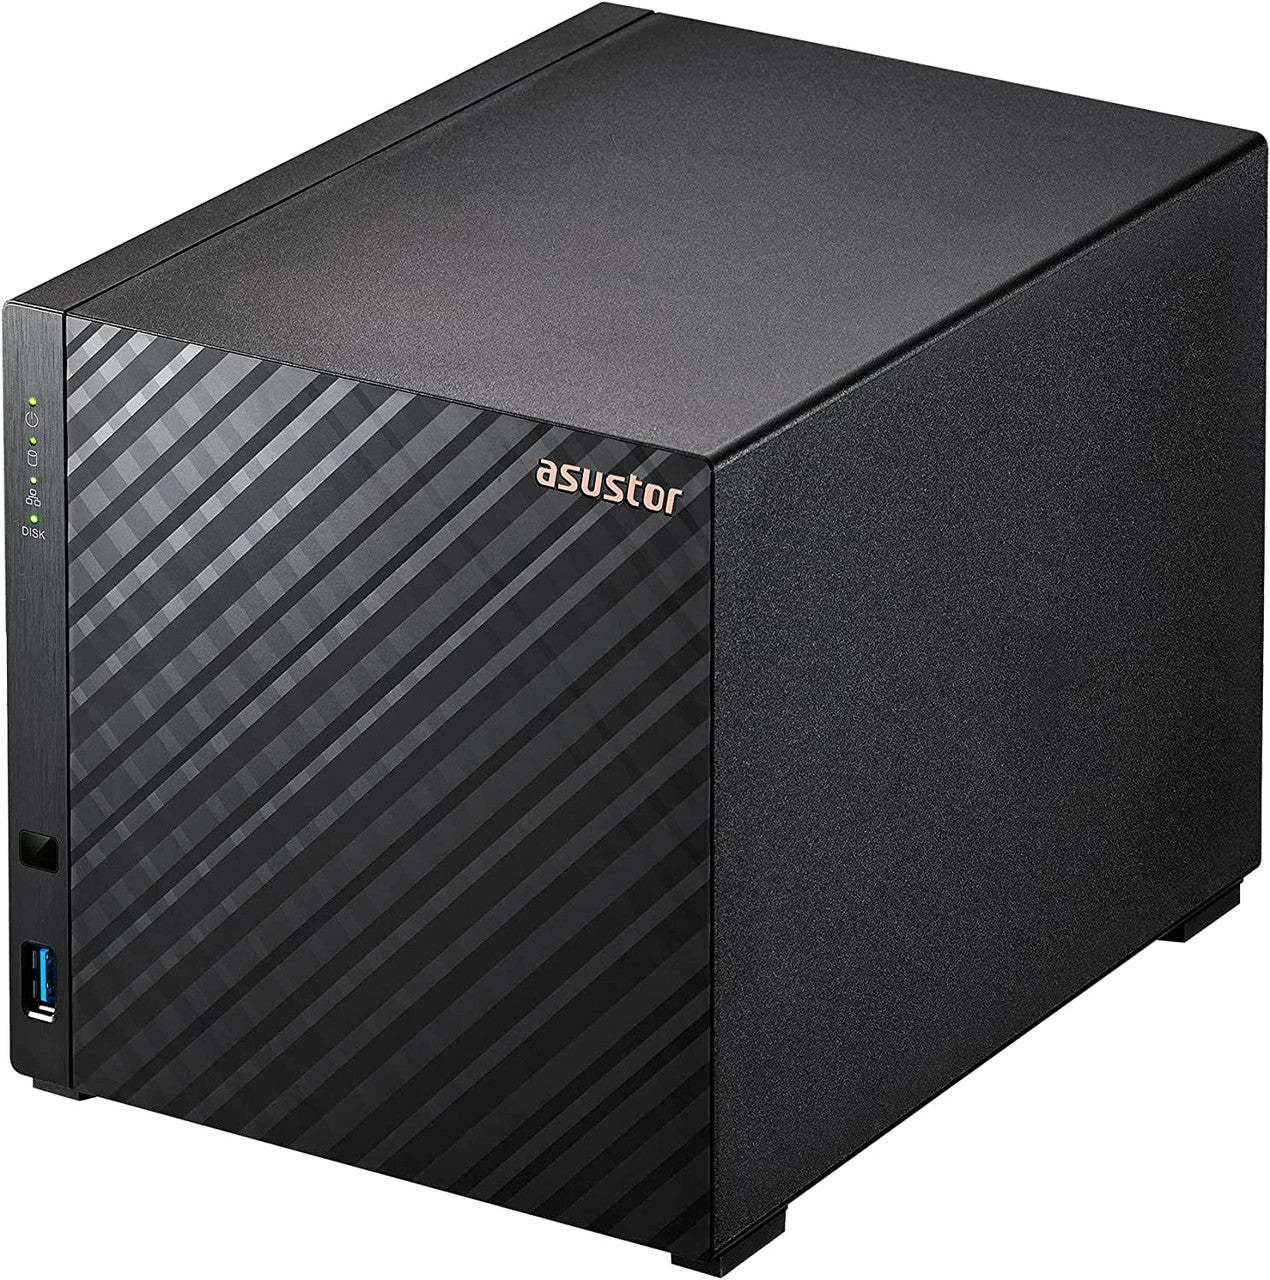 Asustor AS1104T 4-Bay Drivestor 4 NAS with 1GB RAM and 8TB (4x2TB) Western Digital RED PRO Drives